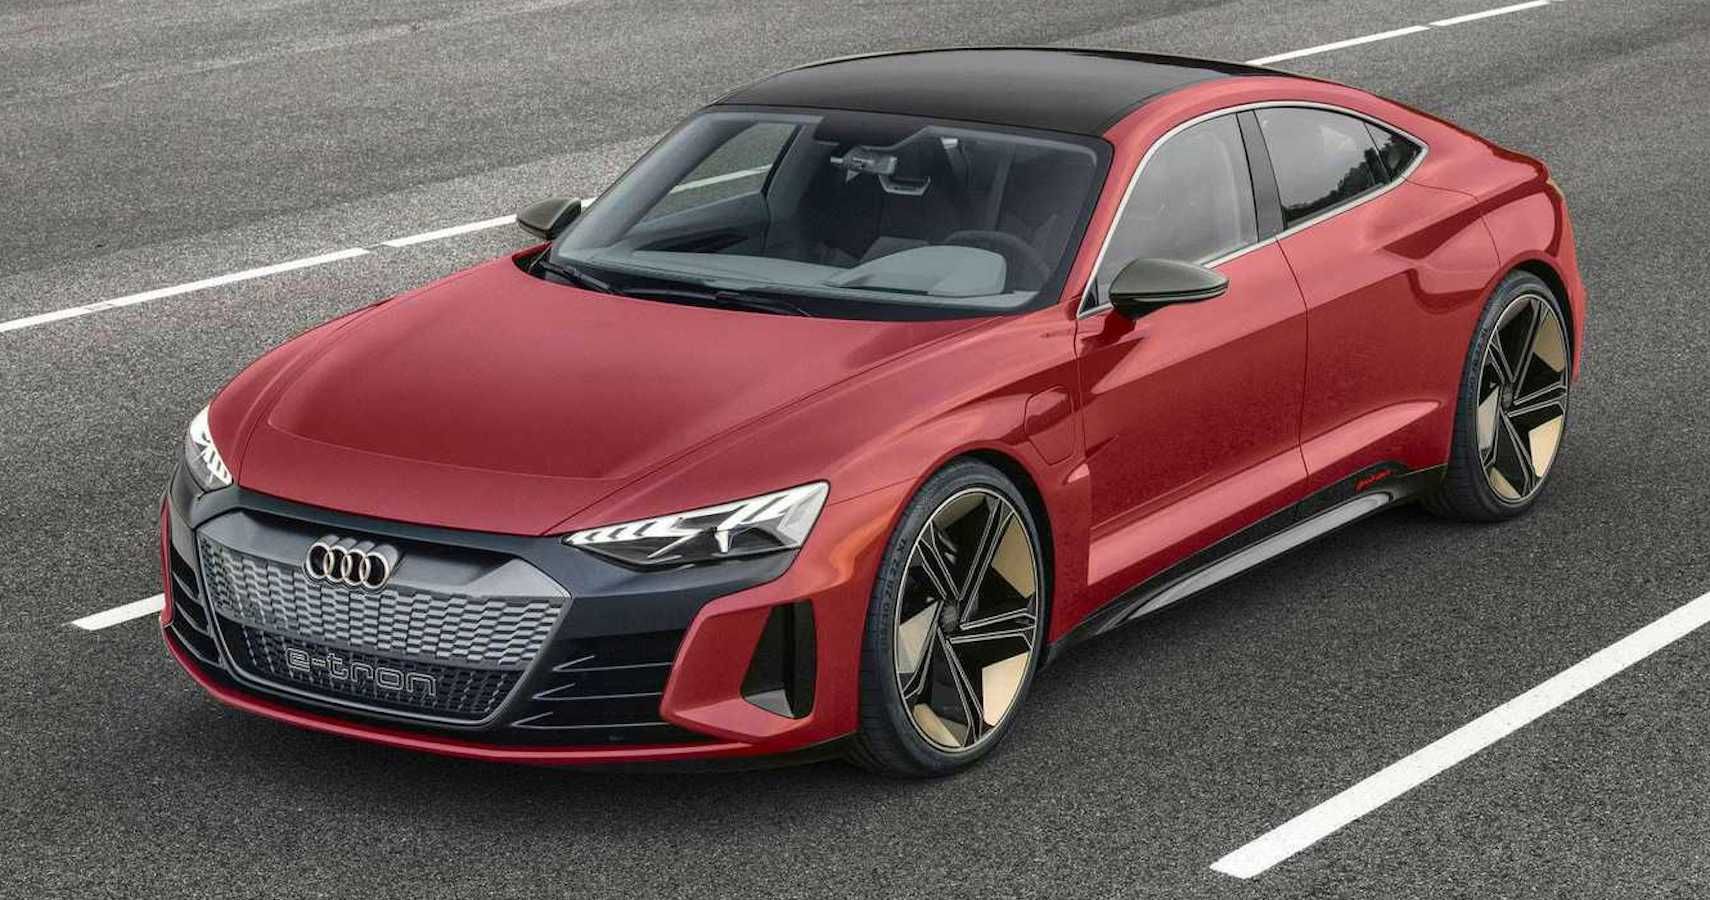 check-it-out-leaked-images-show-the-2021-audi-e-tron-gt-before-the